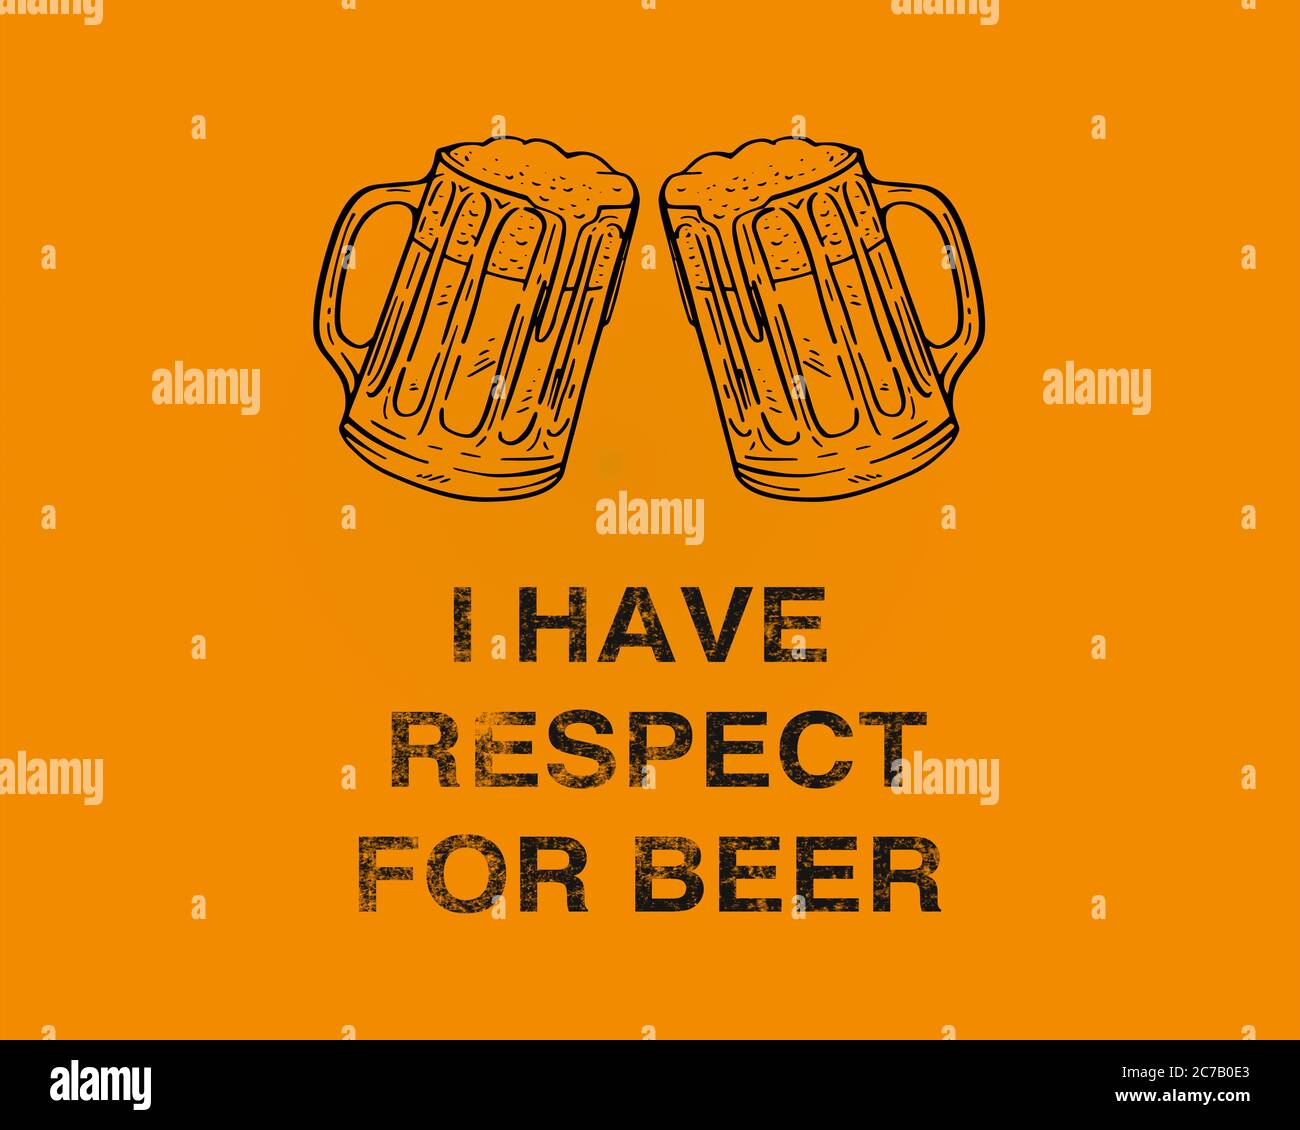 i have respect for beer illustration Stock Photo